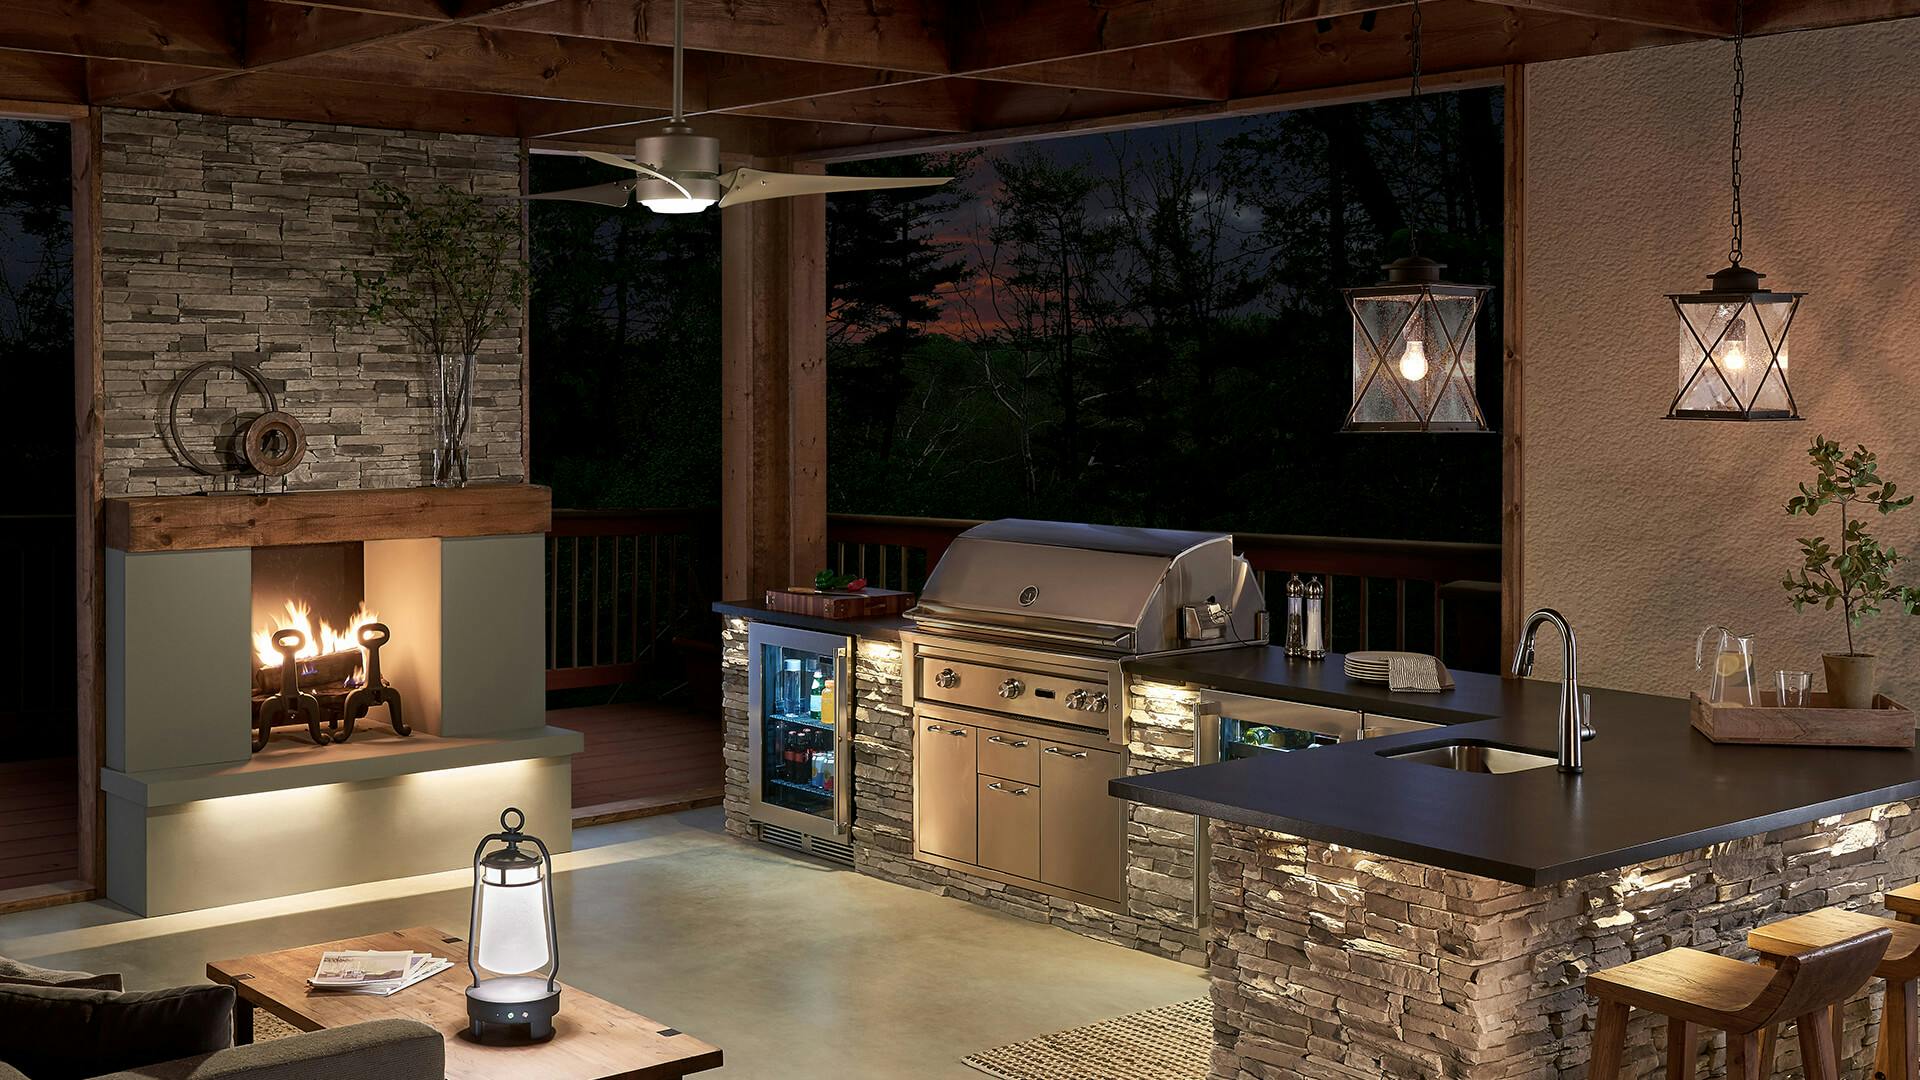 Outdoor living space at night.